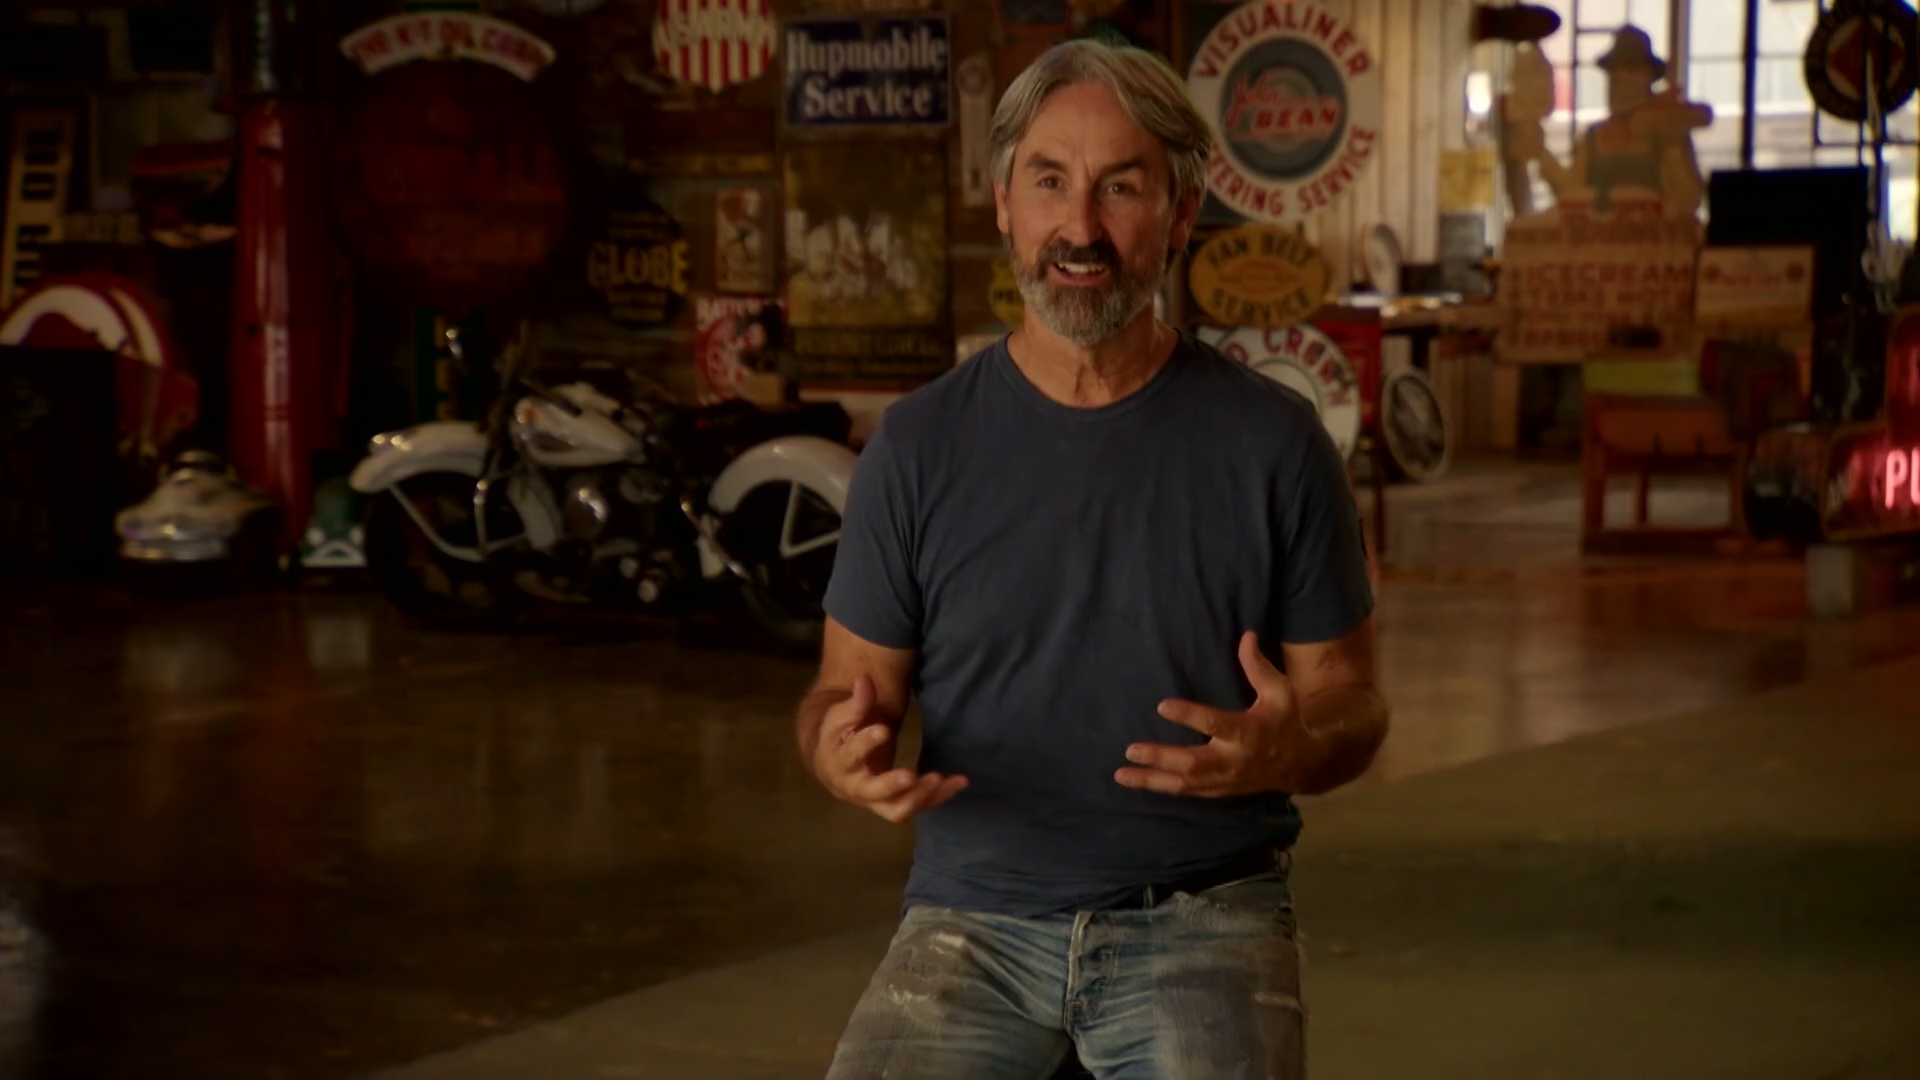 The American Pickers host has picked up some new projects